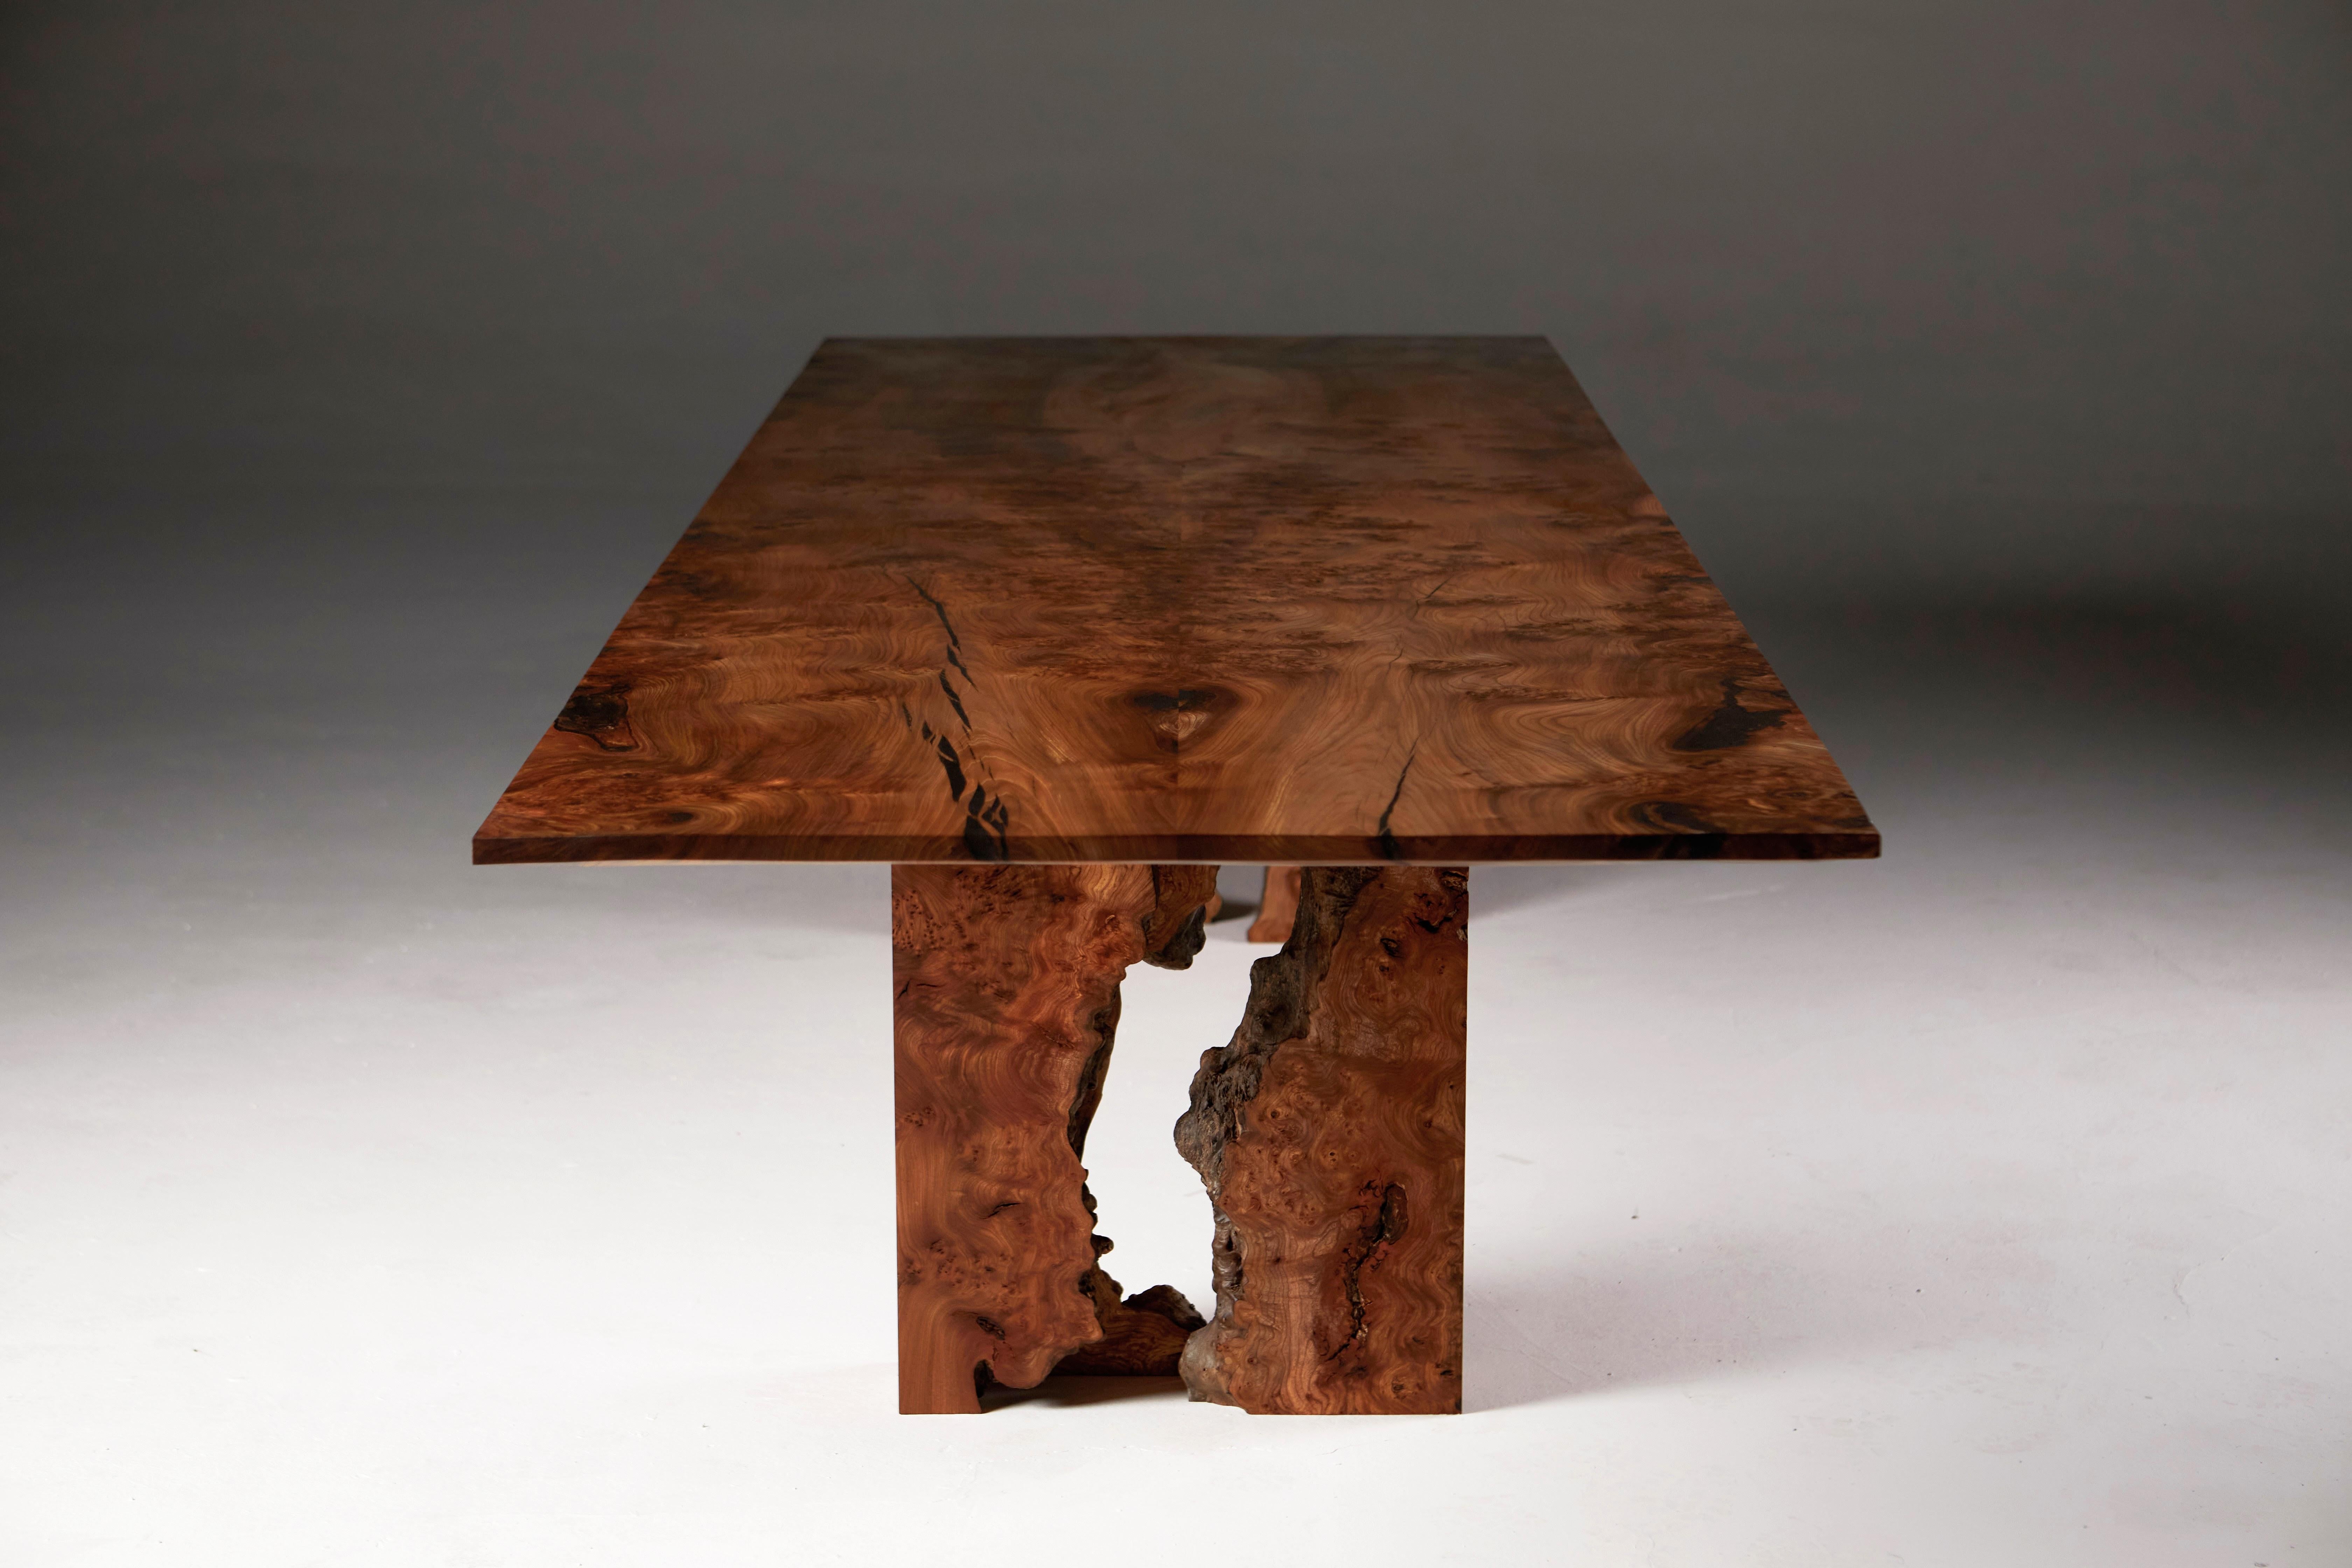 Contemporary Scottish Burr Elm Table with Inverted Live Edge Legs and Book-matched Top.  For Sale